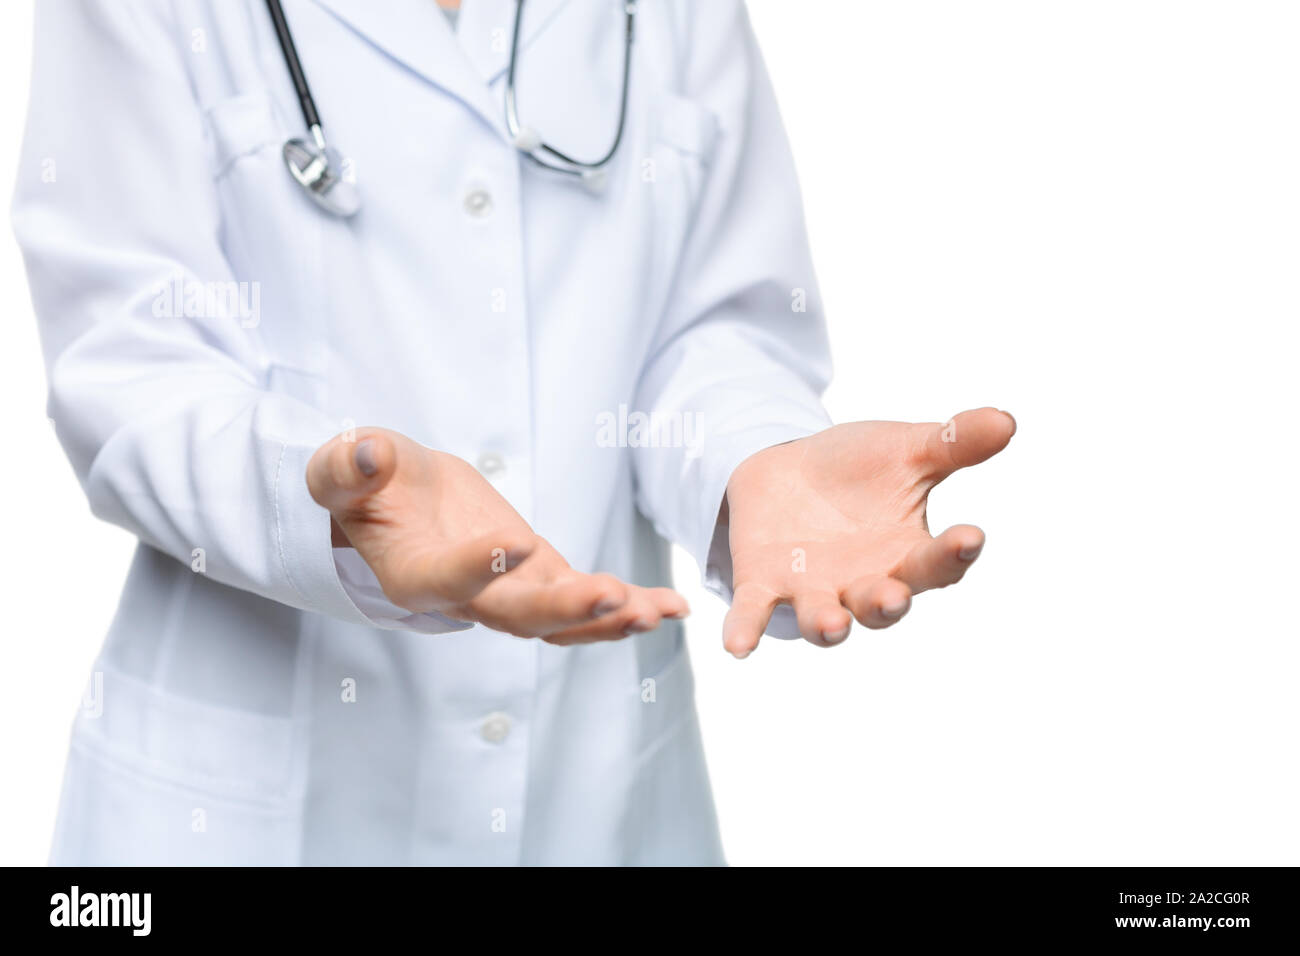 Female doctor standing with outstretched hands and open palms Stock Photo